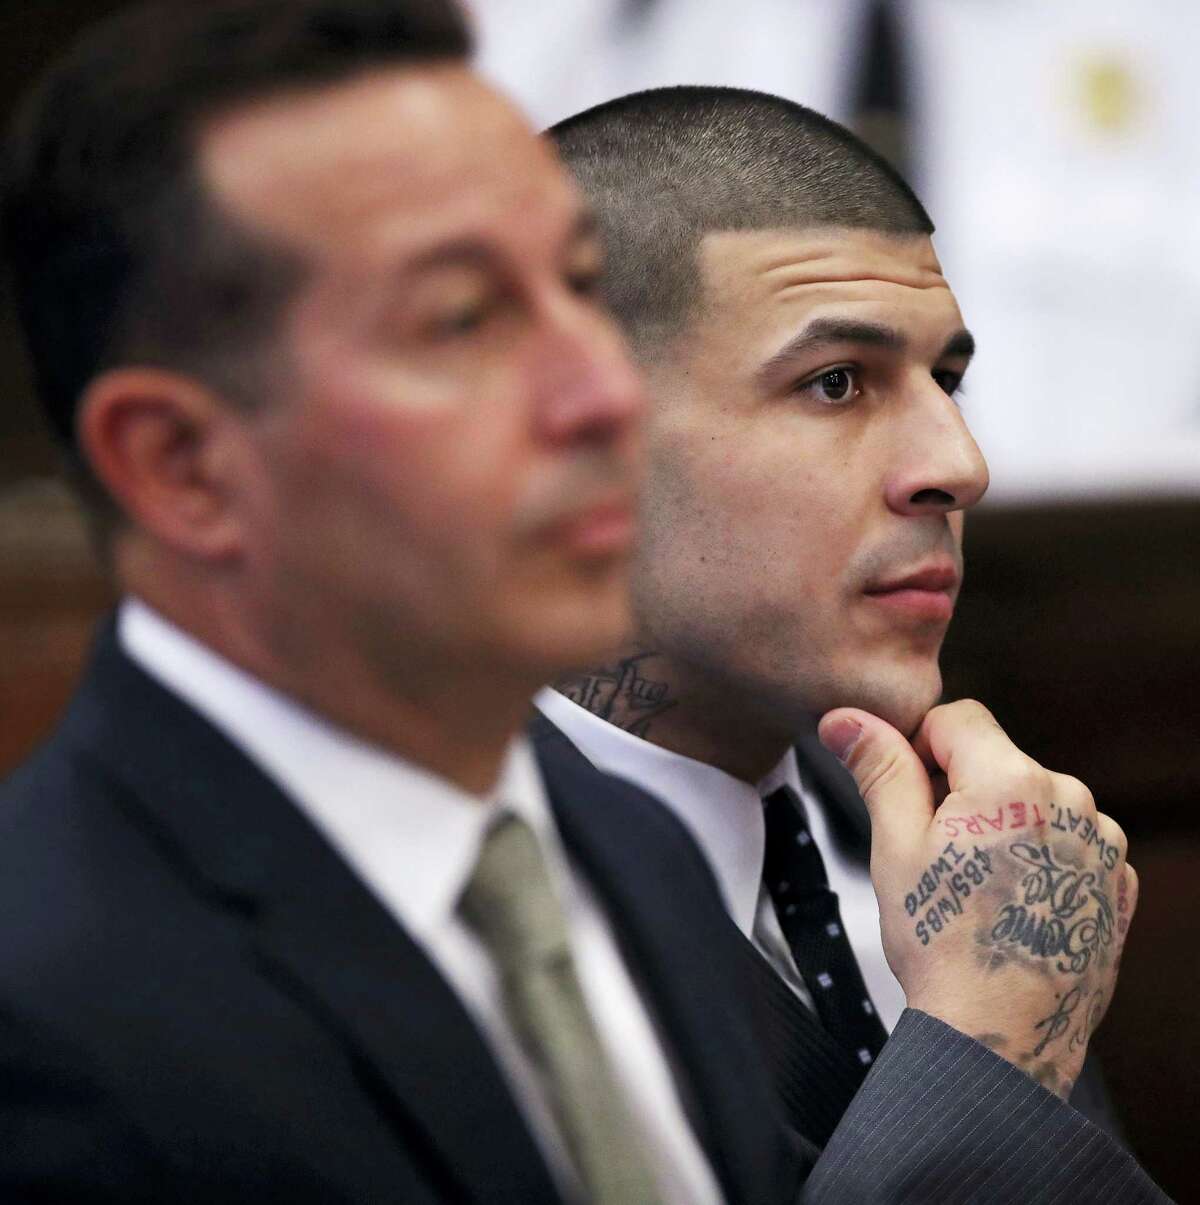 Former New England Patriots NFL football player Aaron Hernandez, right, is seated with his defense attorney Jose Baez as they listen during a pretrial hearing at Suffolk Superior Court in Boston on Thursday.